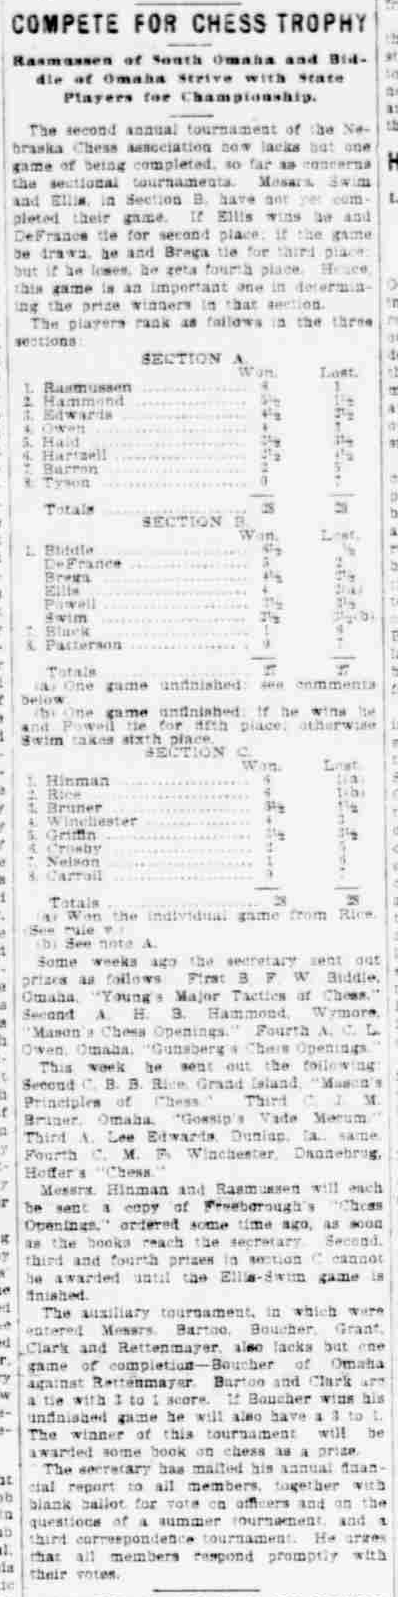 1900.06.03-01 Omaha Daily Bee.png